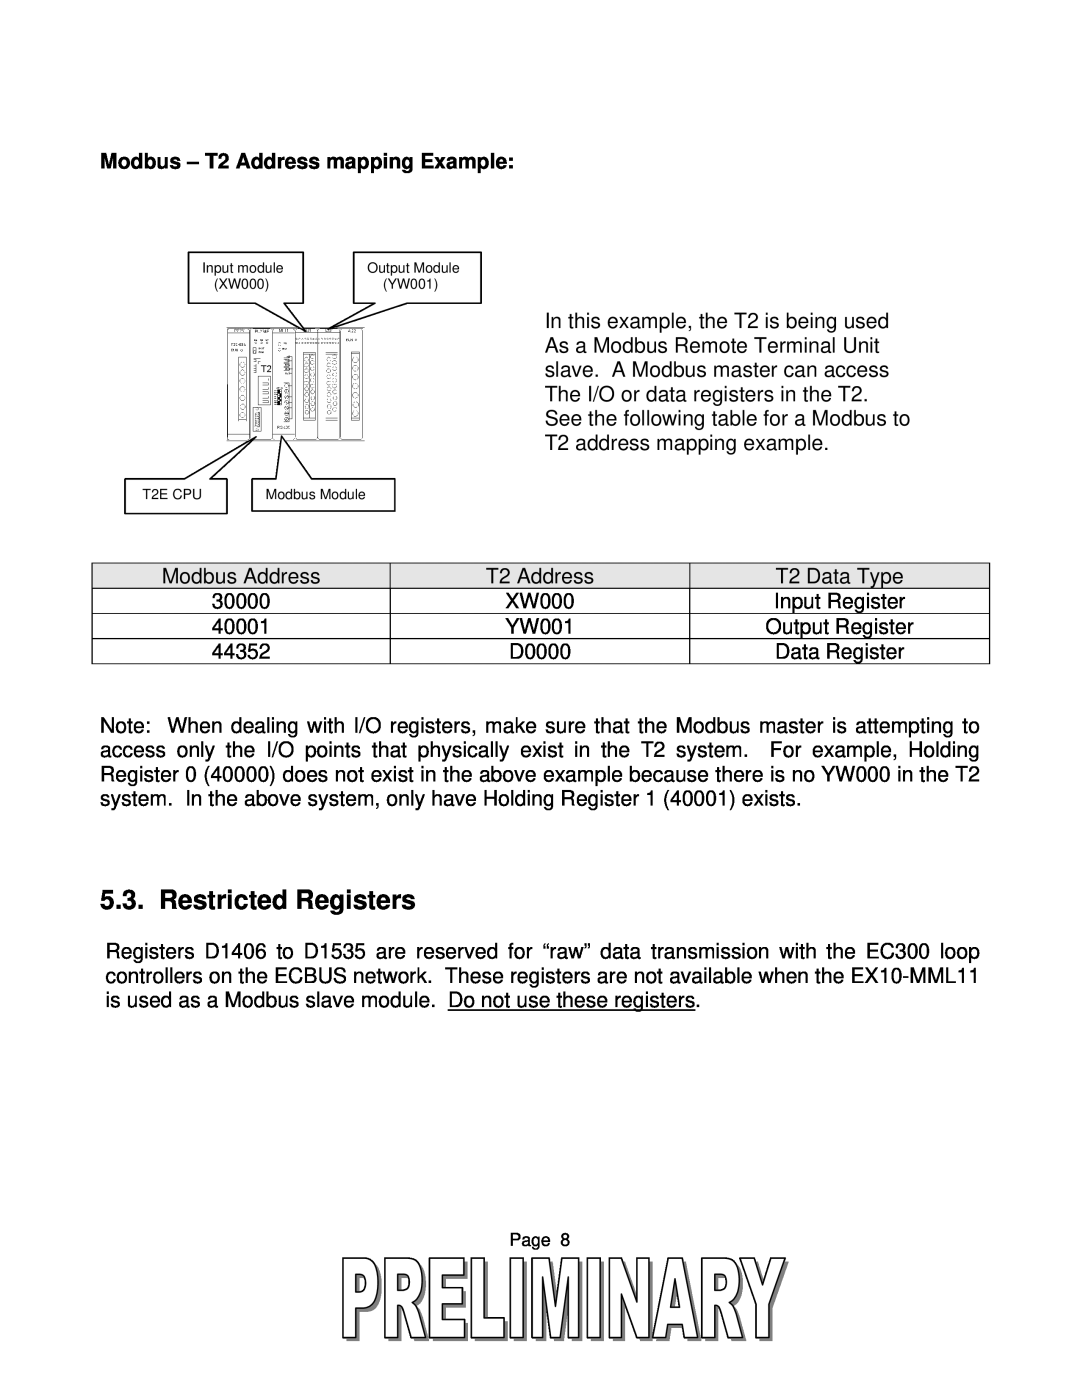 Toshiba T2 Series user manual Restricted Registers, Modbus - T2 Address mapping Example 